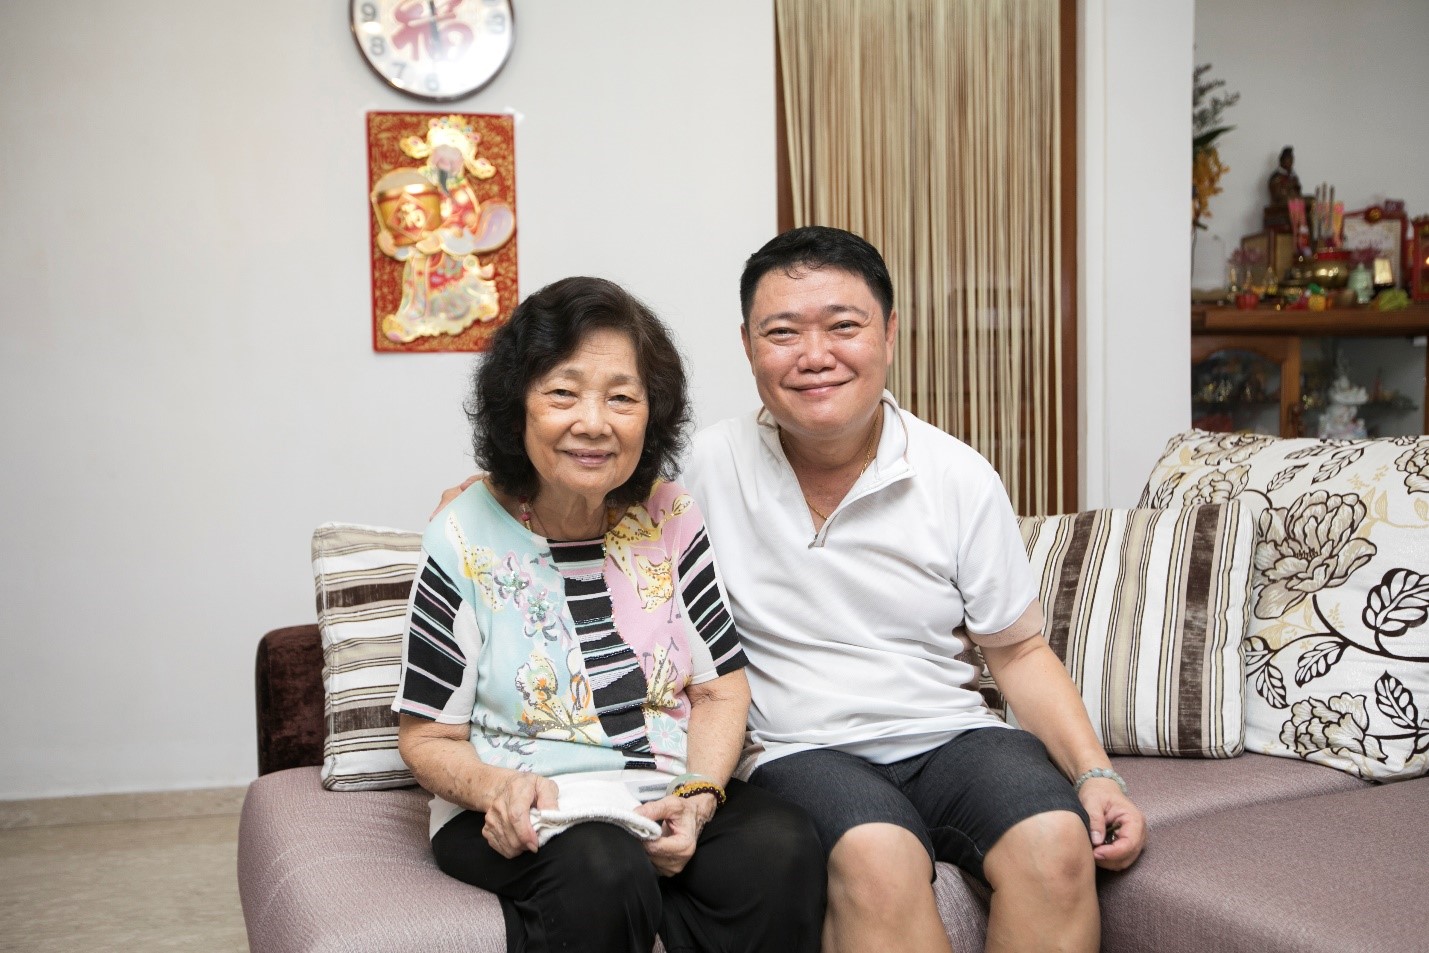 Although he has been caring for his mother for years, her dementia was a new addition to Mr Chang's caregiving duties. At first, he did not know how to manage her condition. Since going with Mdm Lo to AMKFSC weekly for activities, he has found the caregiver support he needed.